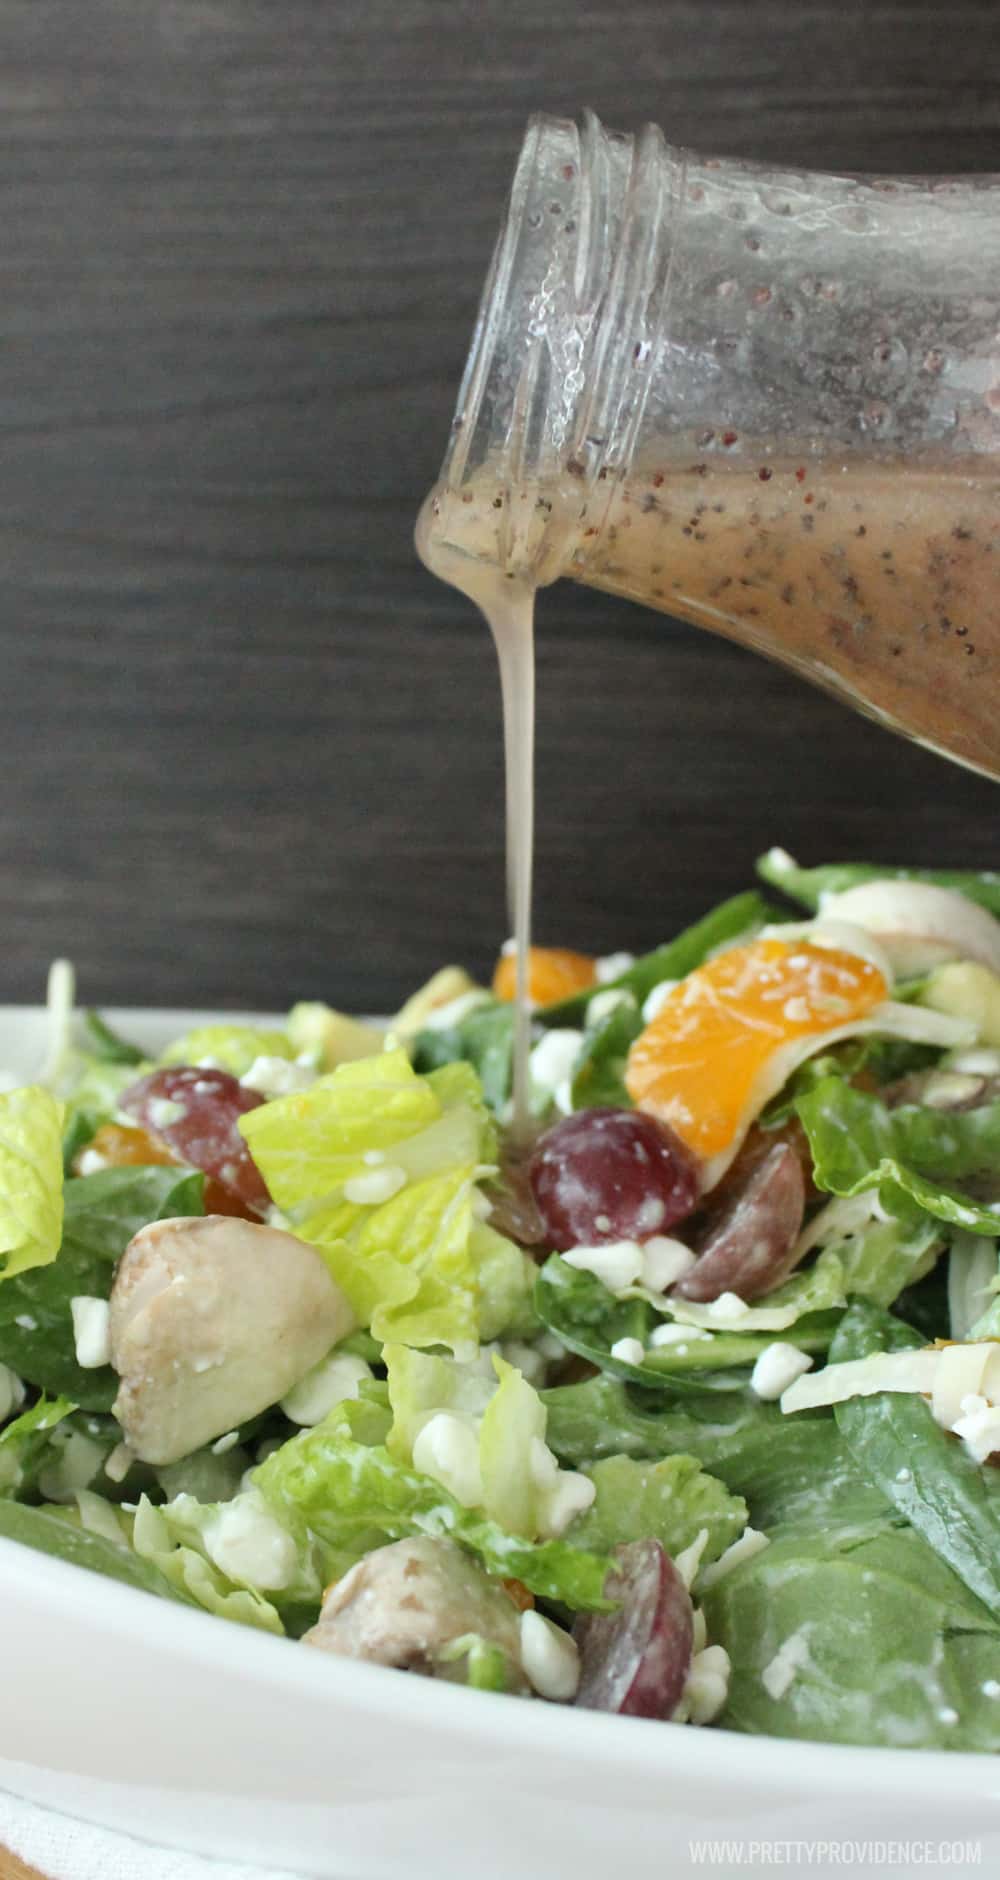 Okay this is my ABSOLUTE FAVORITE SALAD of all time! Literally so delicious and so easy to throw together! The perfect pairing of sweet and salty flavors, so good! 